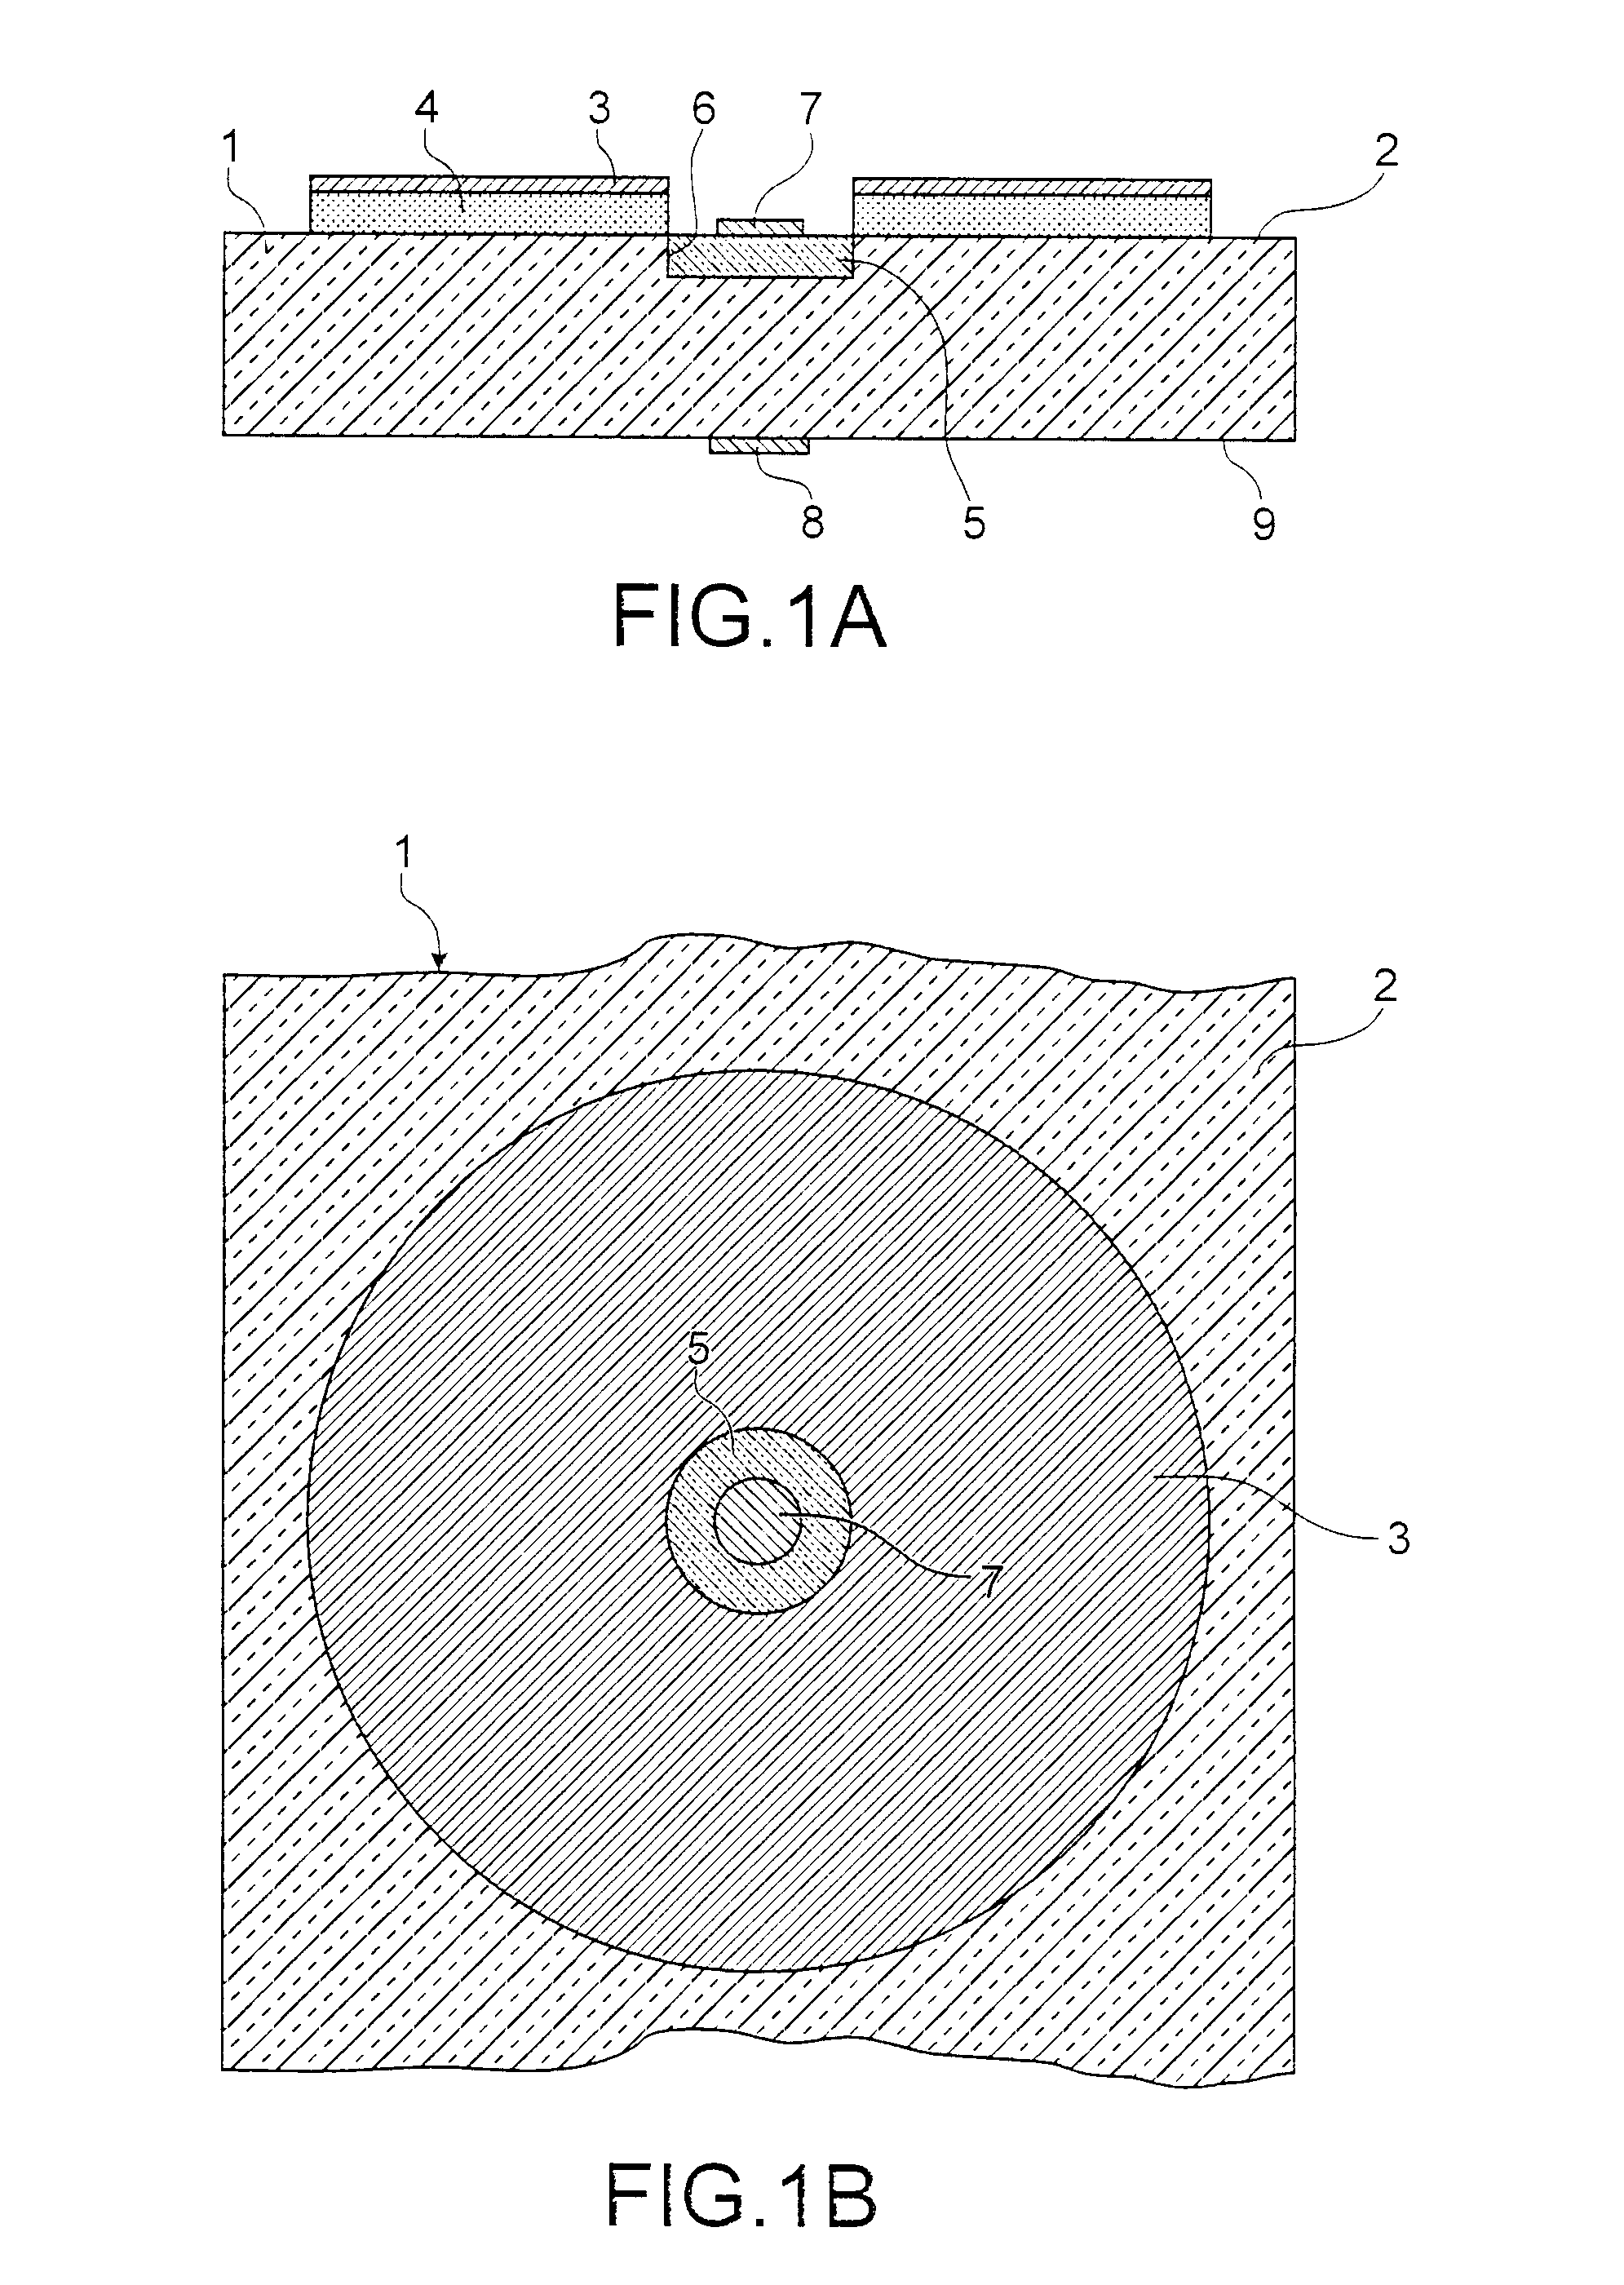 Light-emitting diode in semiconductor material and its fabrication method